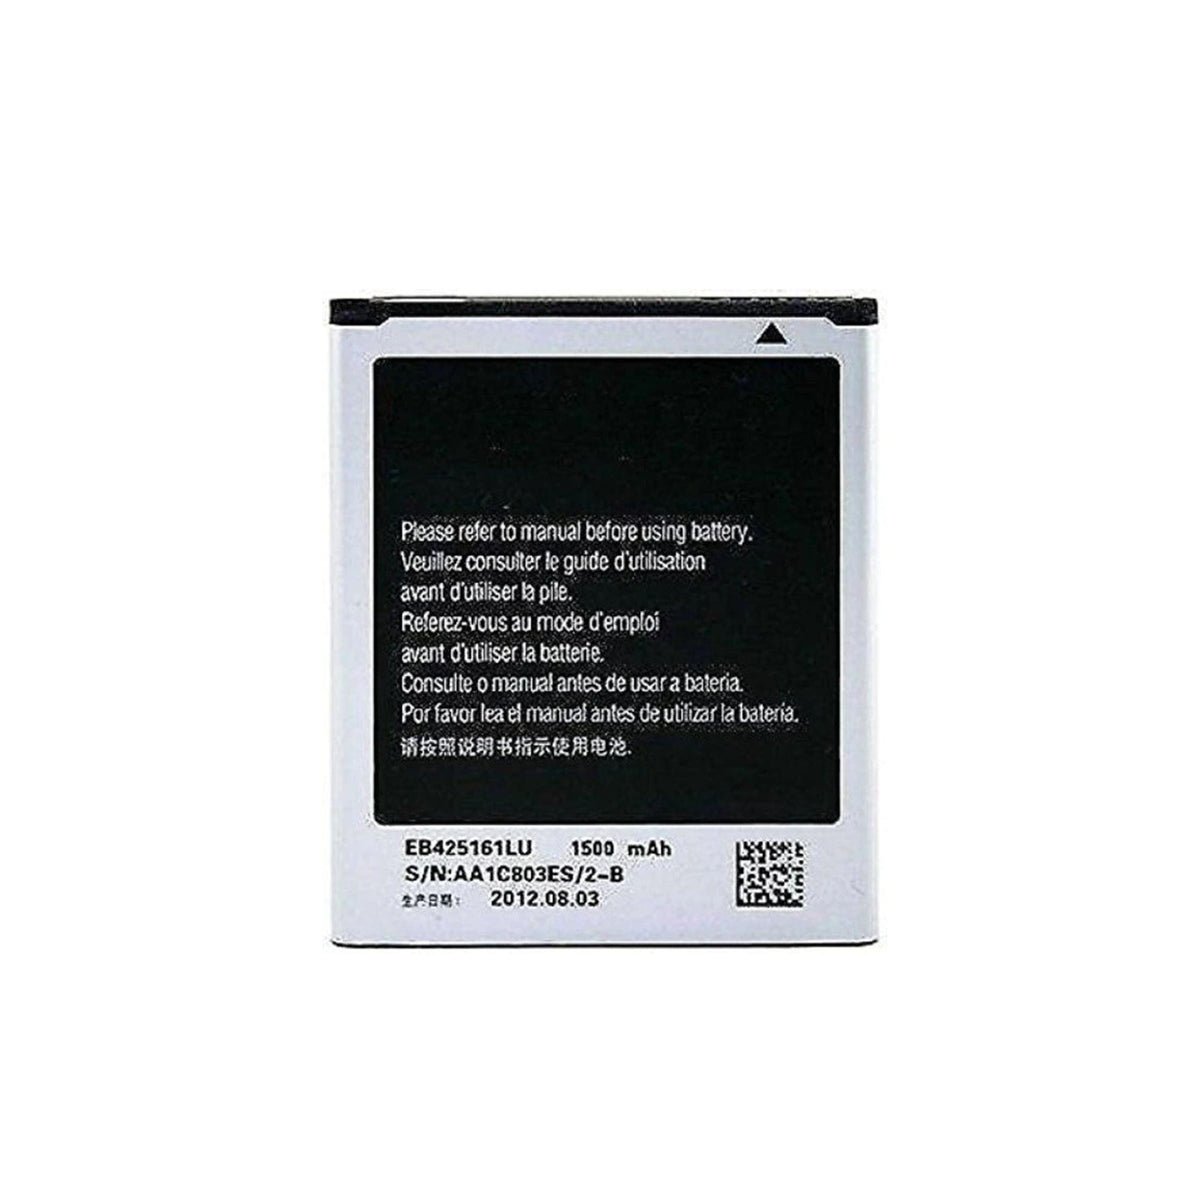 MOBILE BATTERY FOR SAMSUNG GALAXY STAR PRO - GT S7262